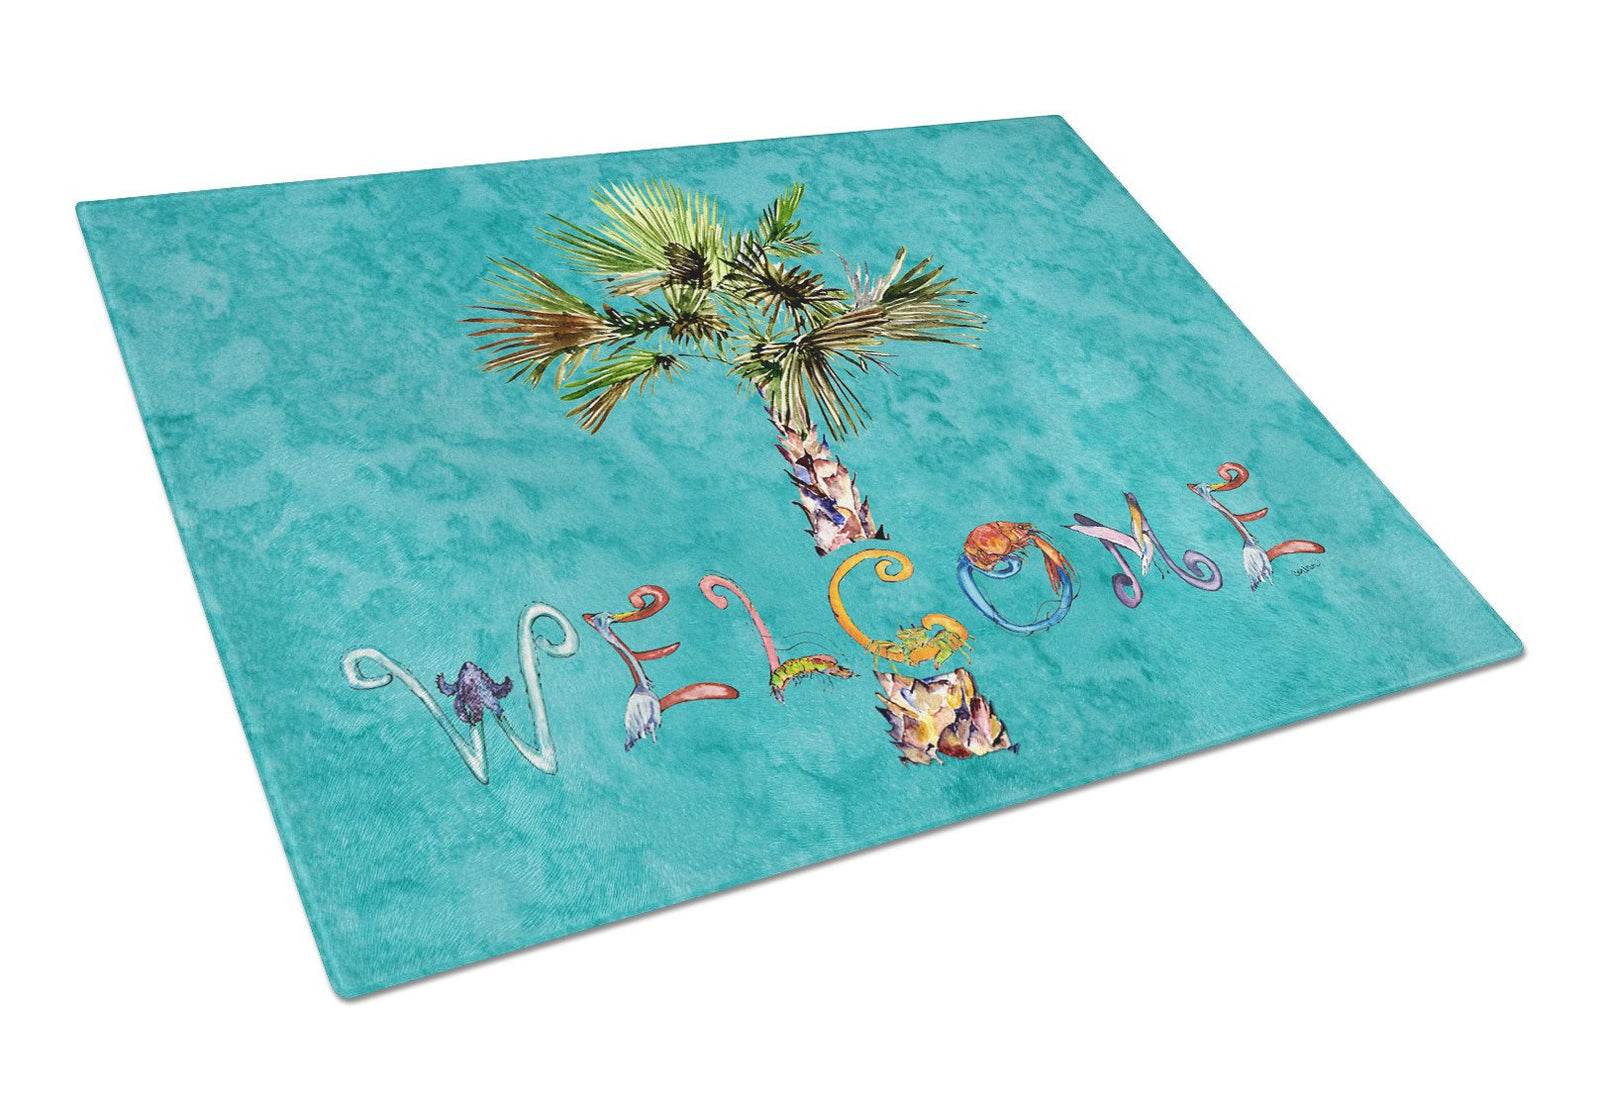 Welcome Palm Tree on Teal Glass Cutting Board Large 8711LCB by Caroline's Treasures